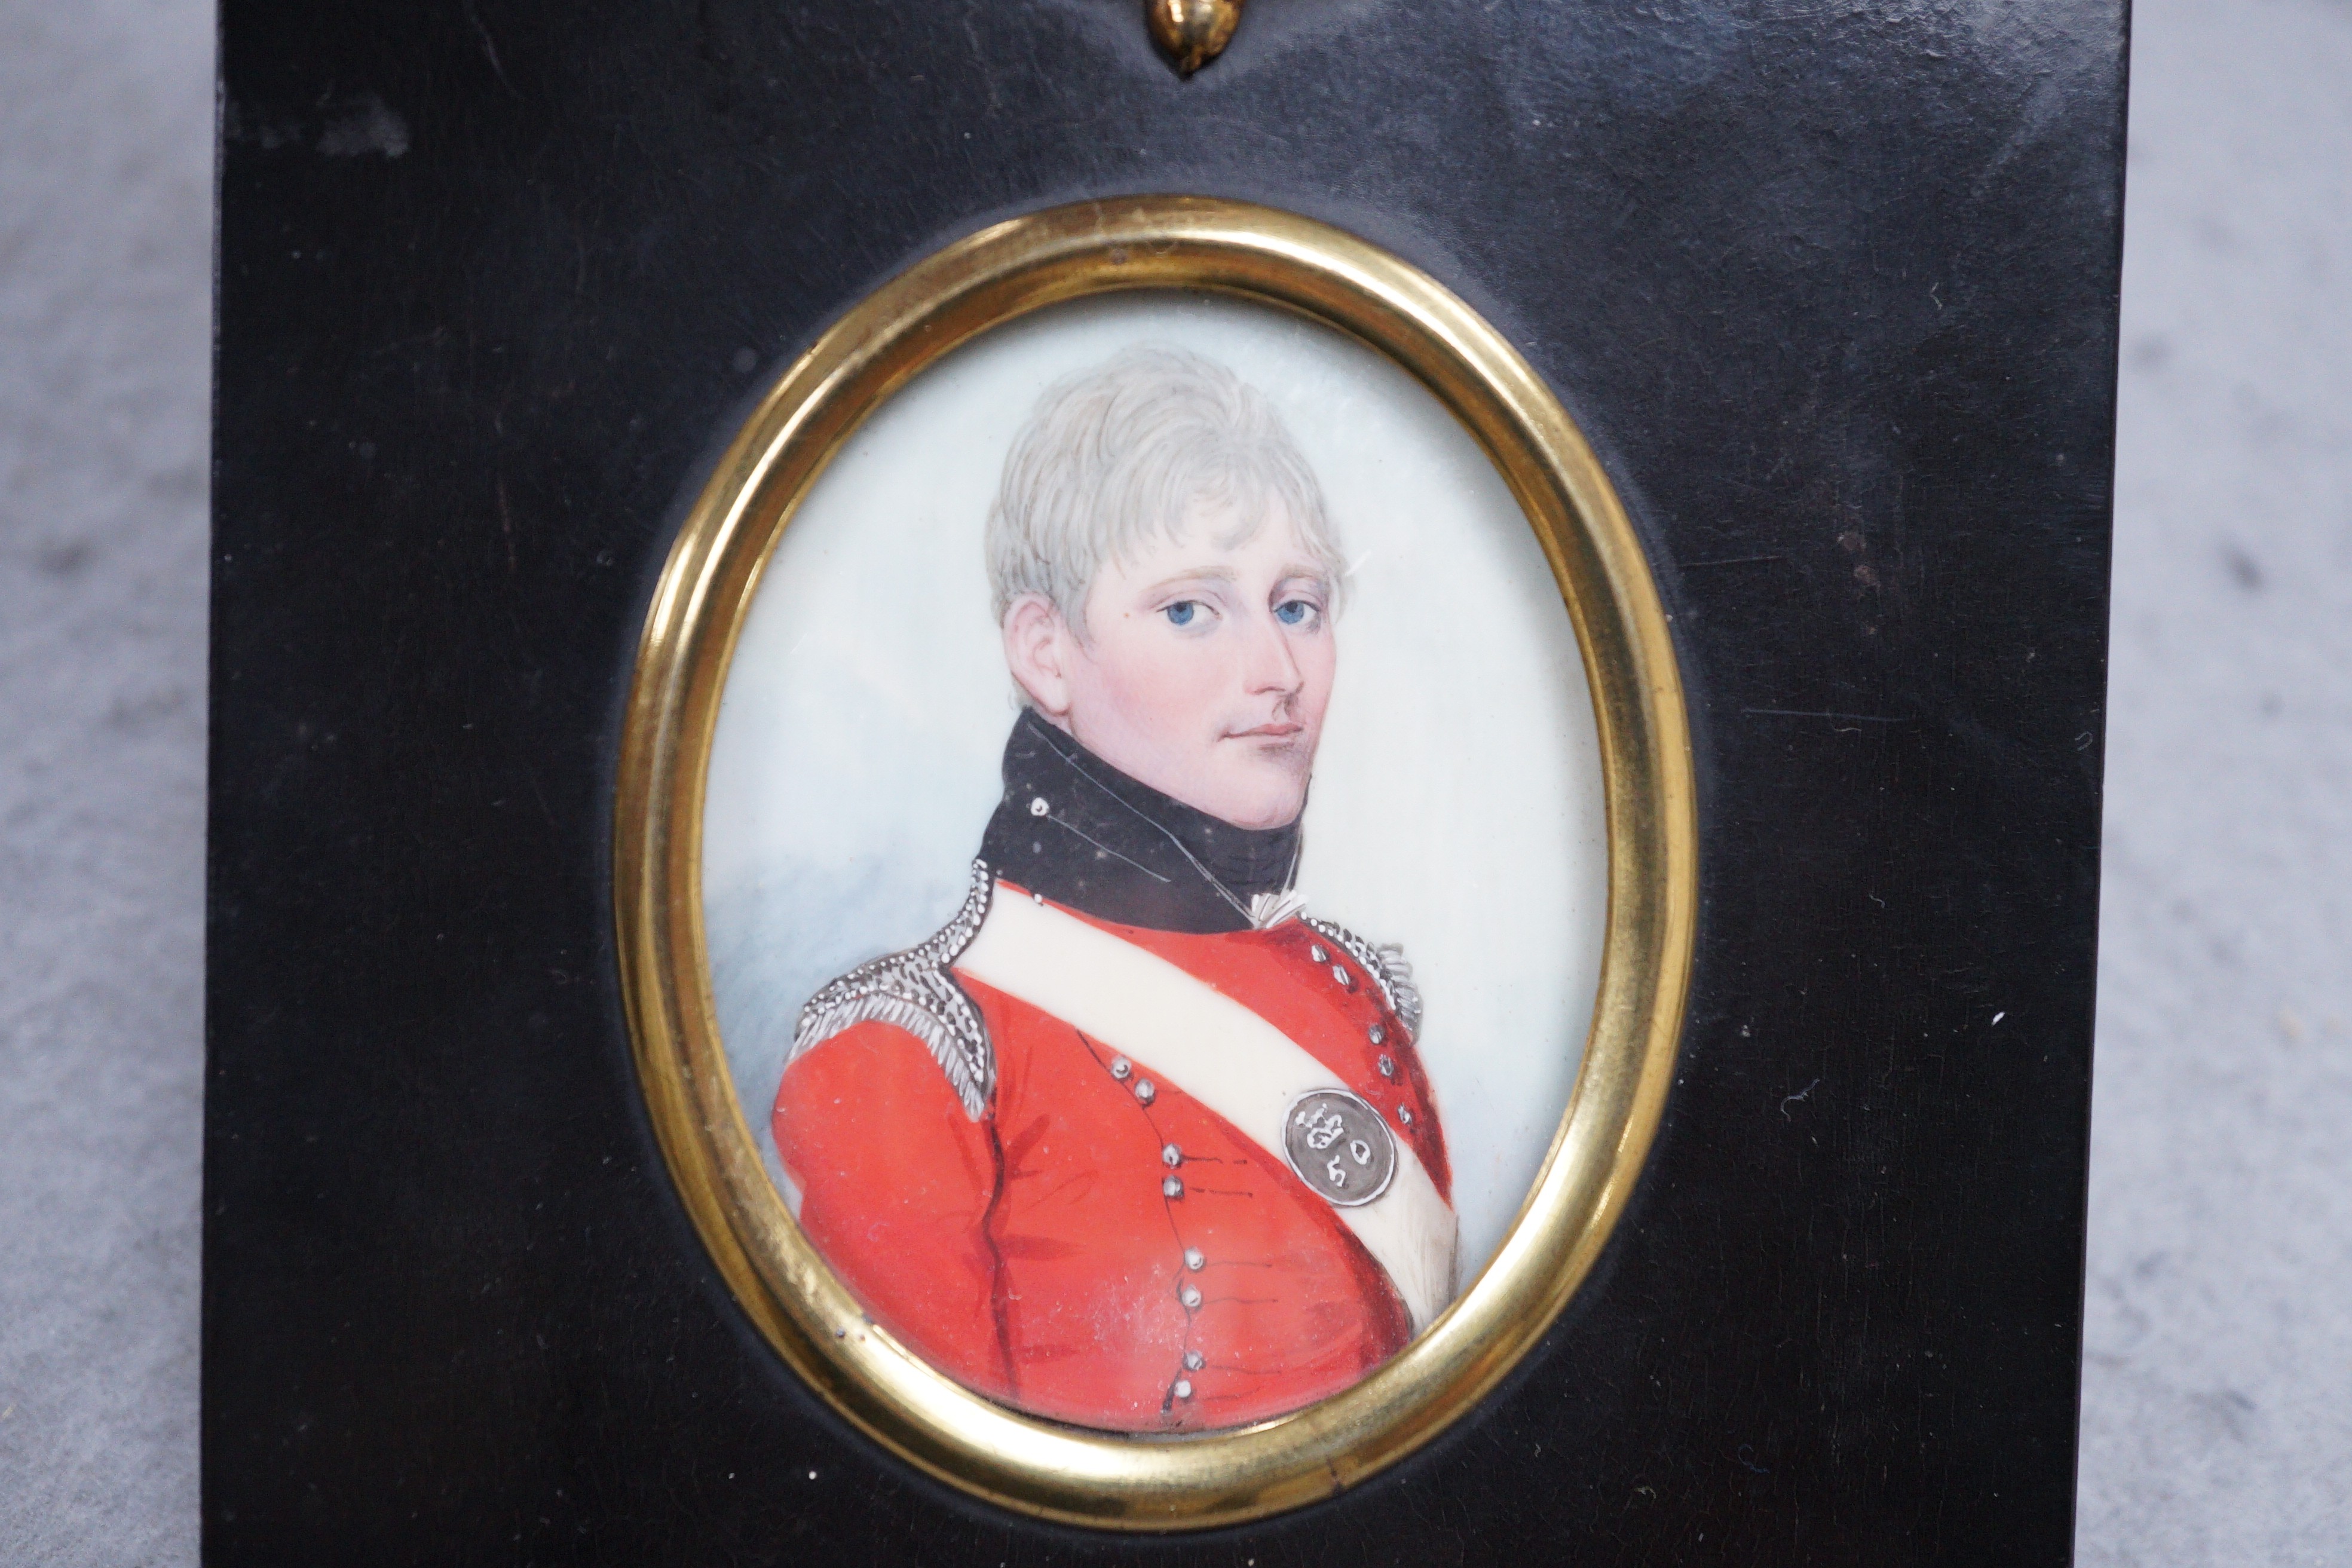 Attributed to Frederick Buck (Irish, 1771-1840), watercolour on ivory portrait miniature of an army officer, 6 x 5cm